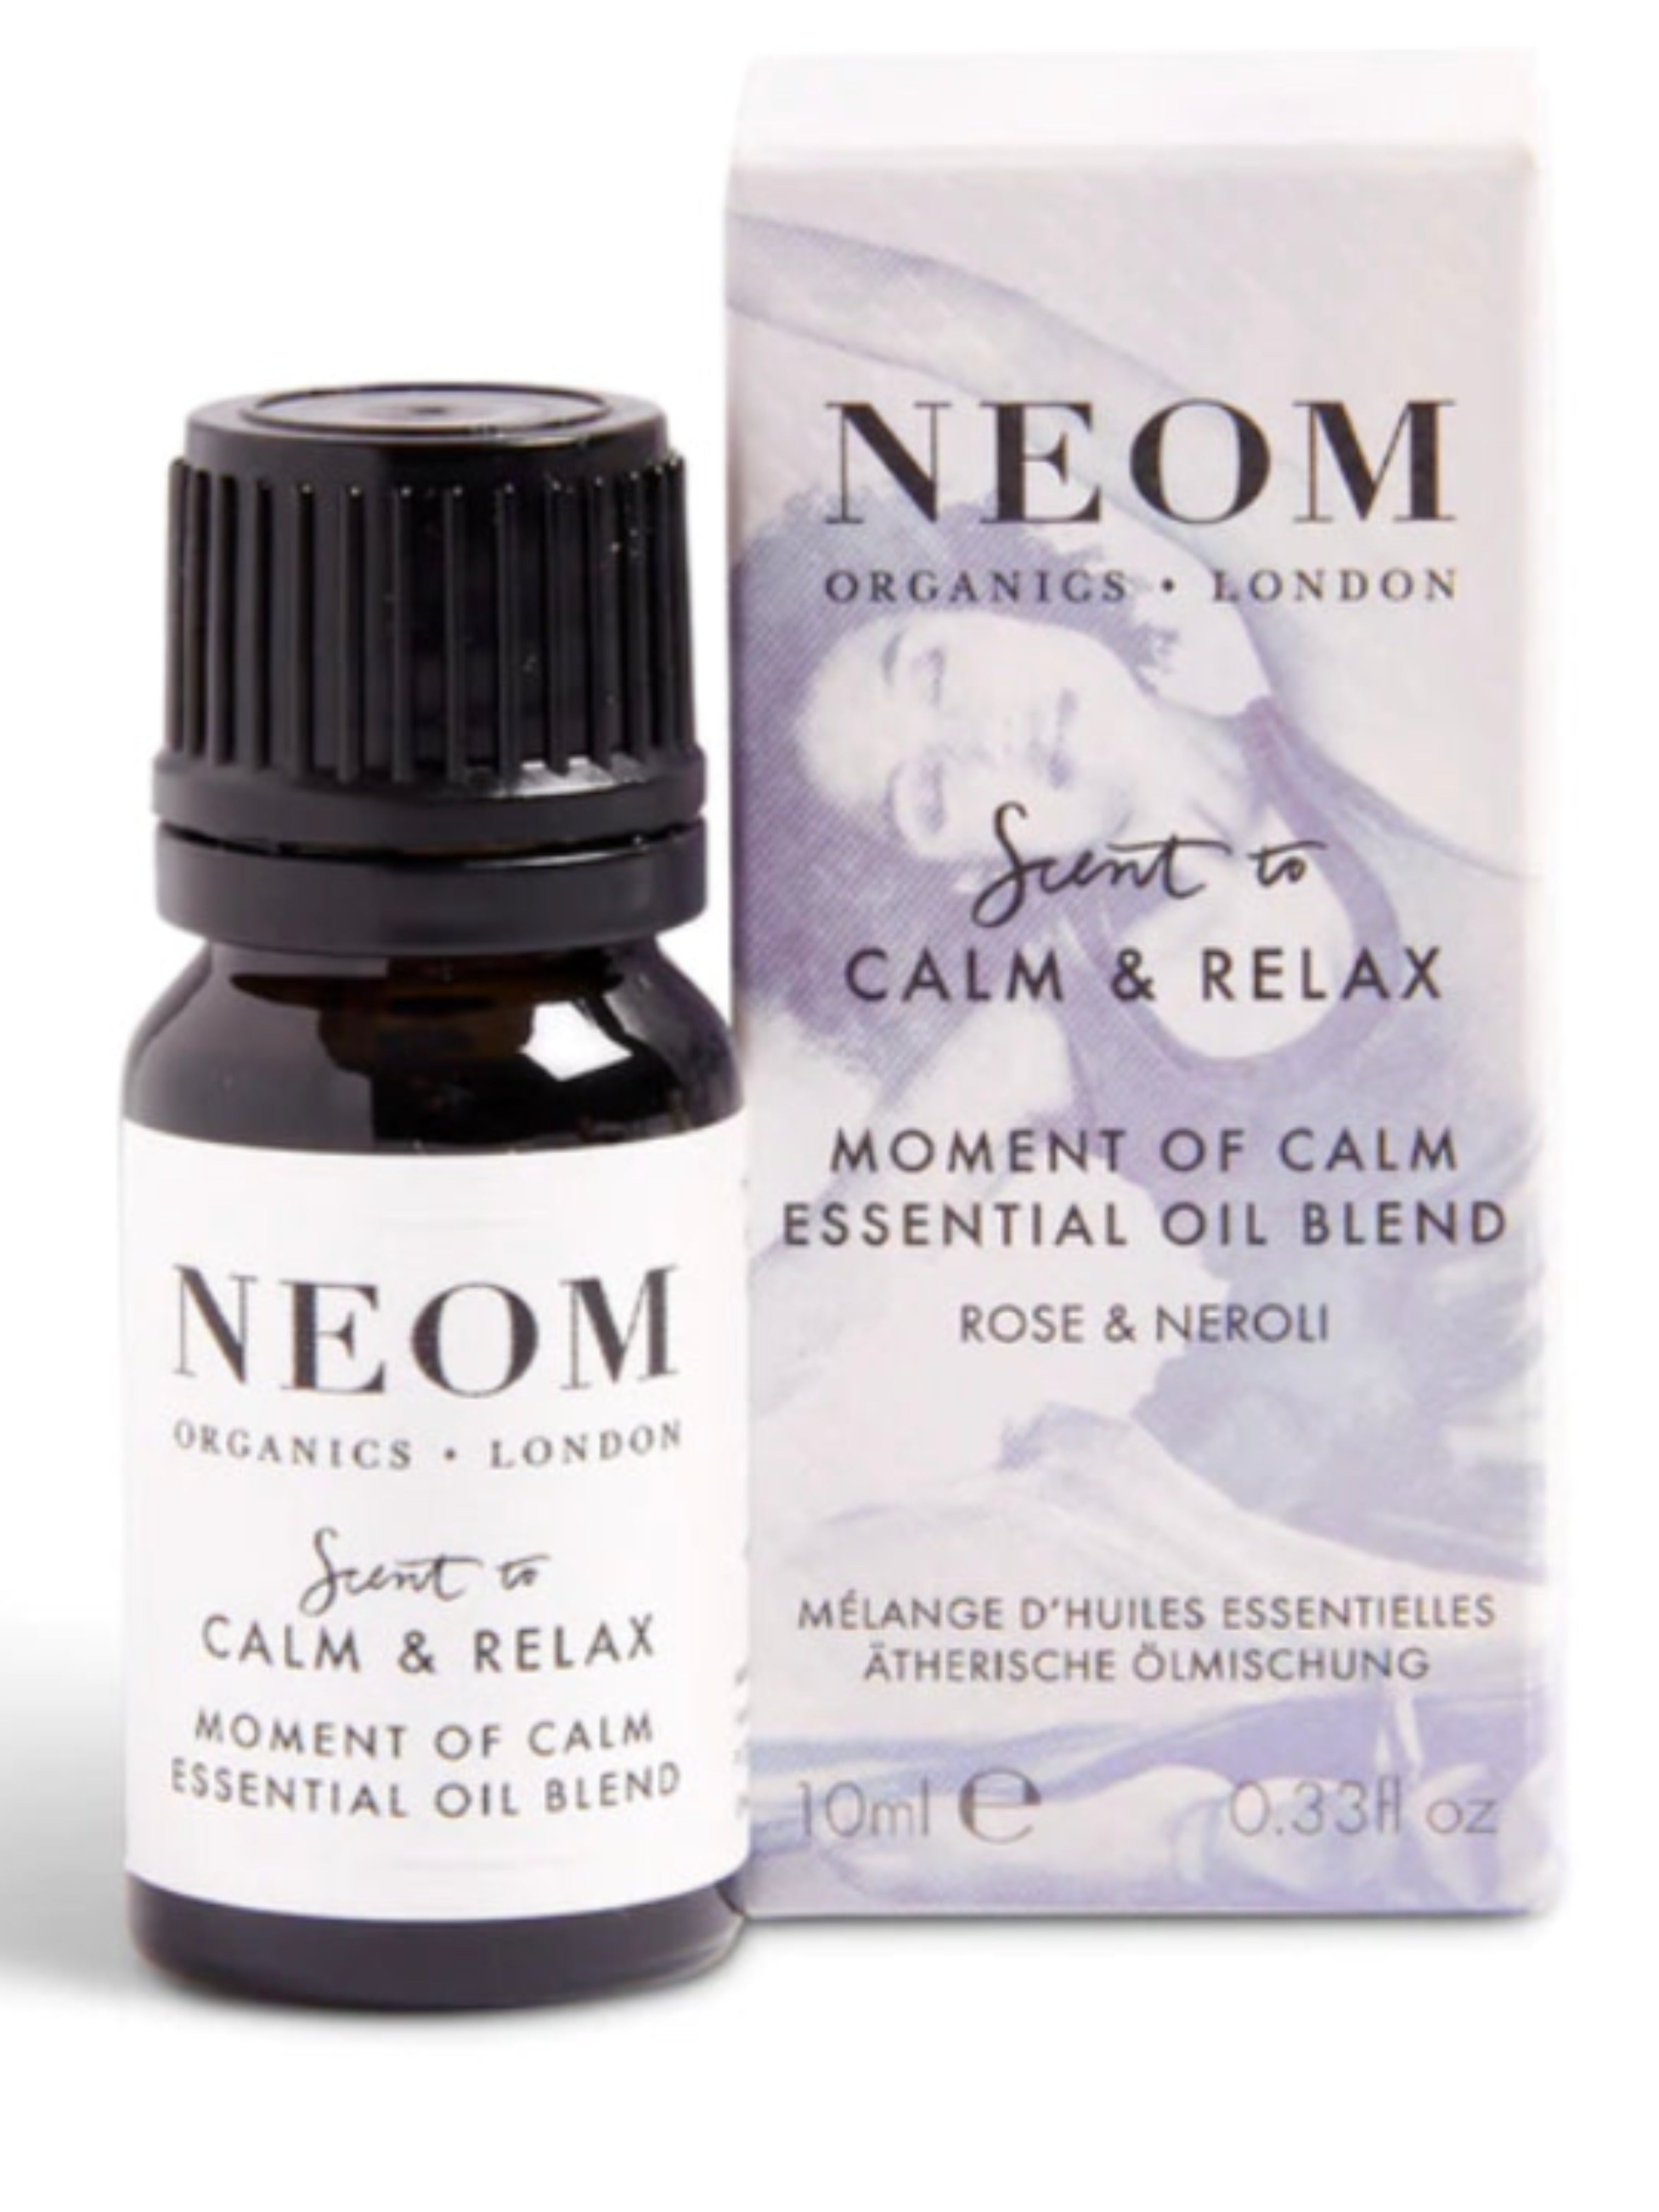 NEOM Moment of Calm Essential Oil Blend